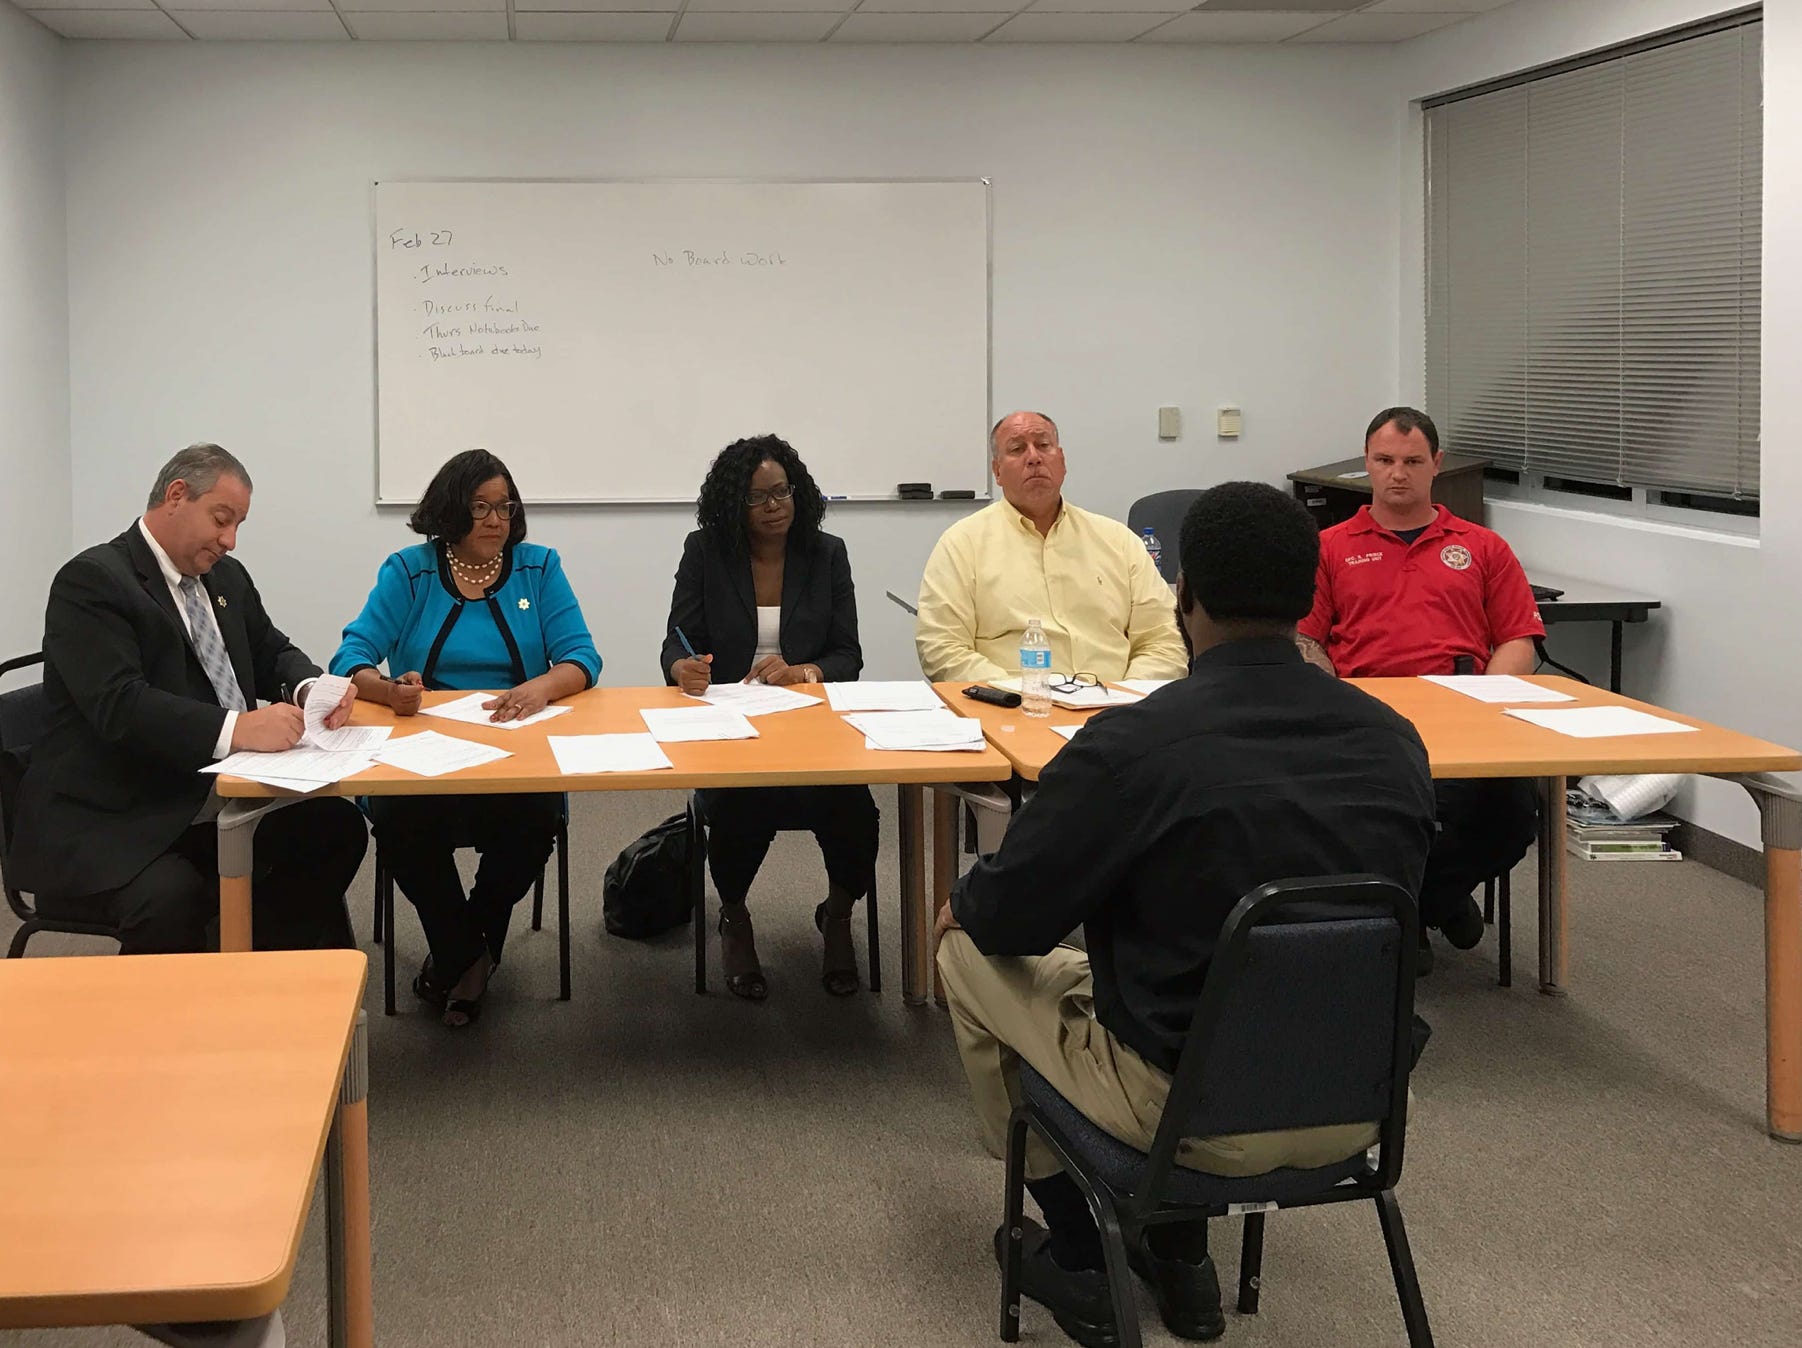 Adapted image from Keiser University criminal justice student's experience mock panel interview at https://www.keiseruniversity.edu/criminal-justice-students-experience-mock-panel-interview/